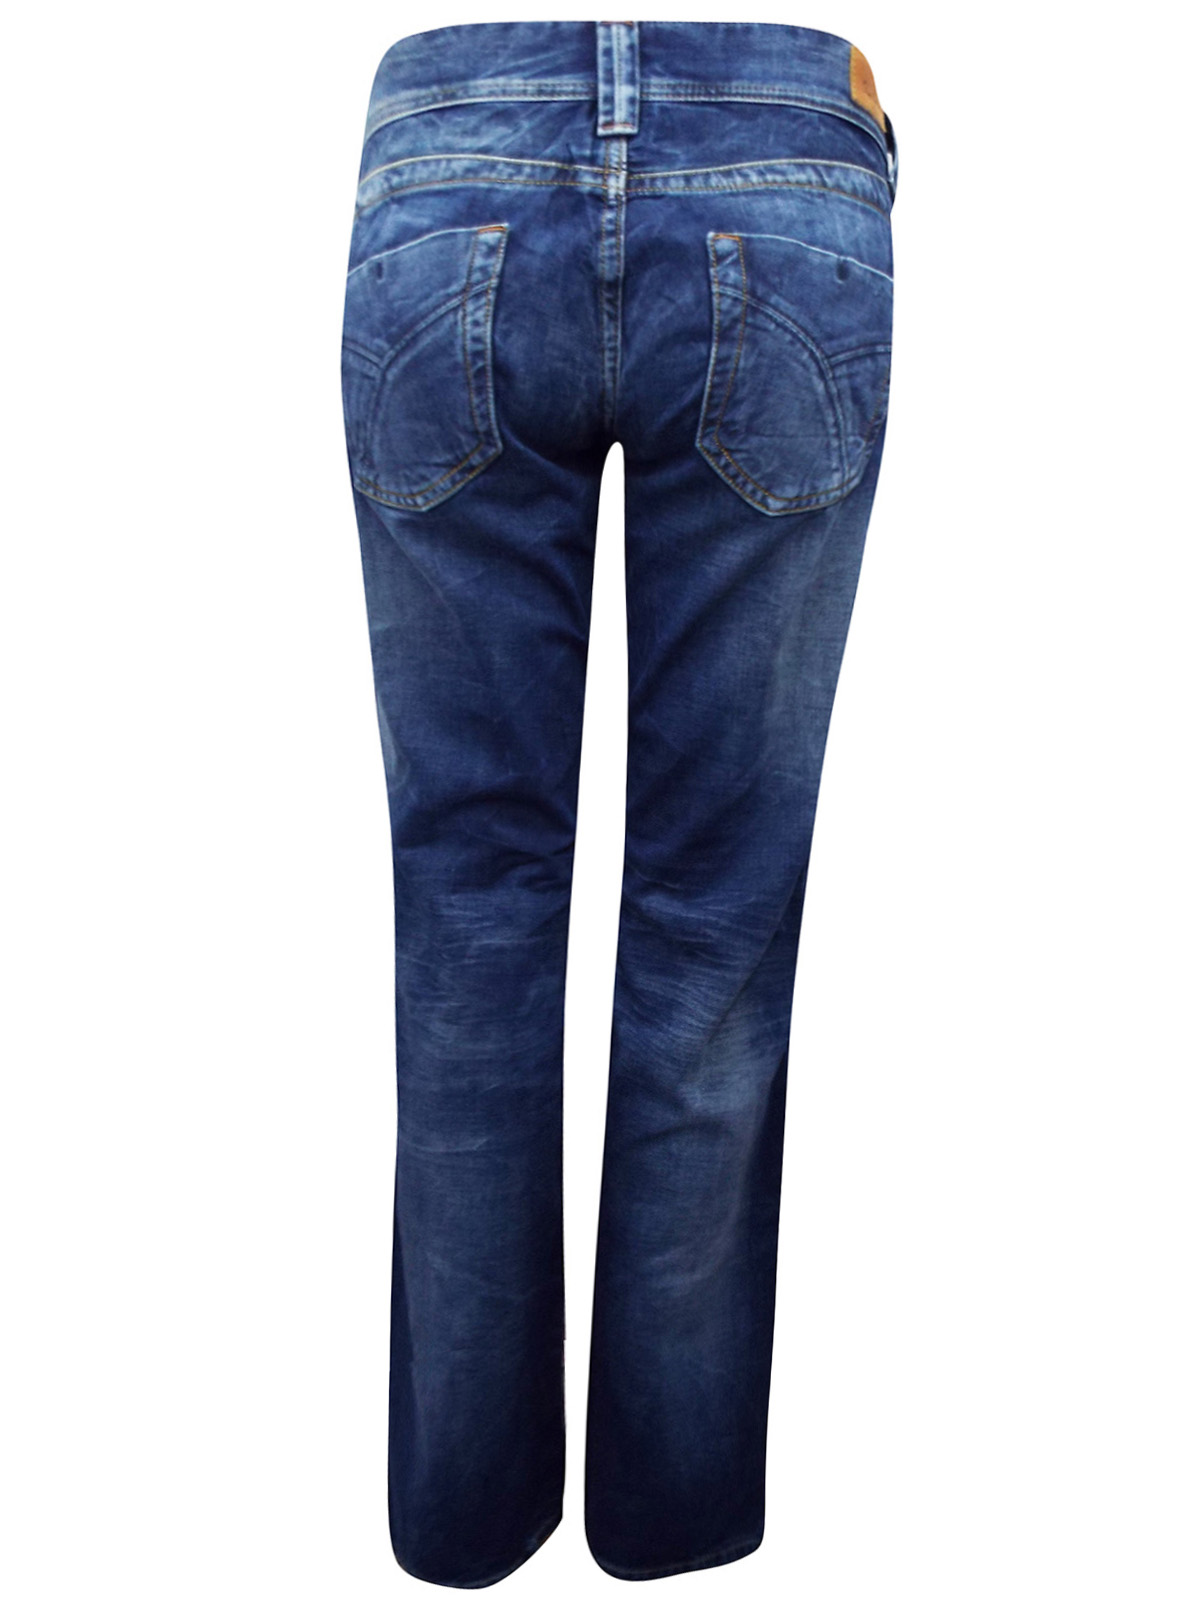 Pepe Jeans - - Pepe Jeans OLYMPIA Denim Wash Comfort Fit Jeans - Waist ...